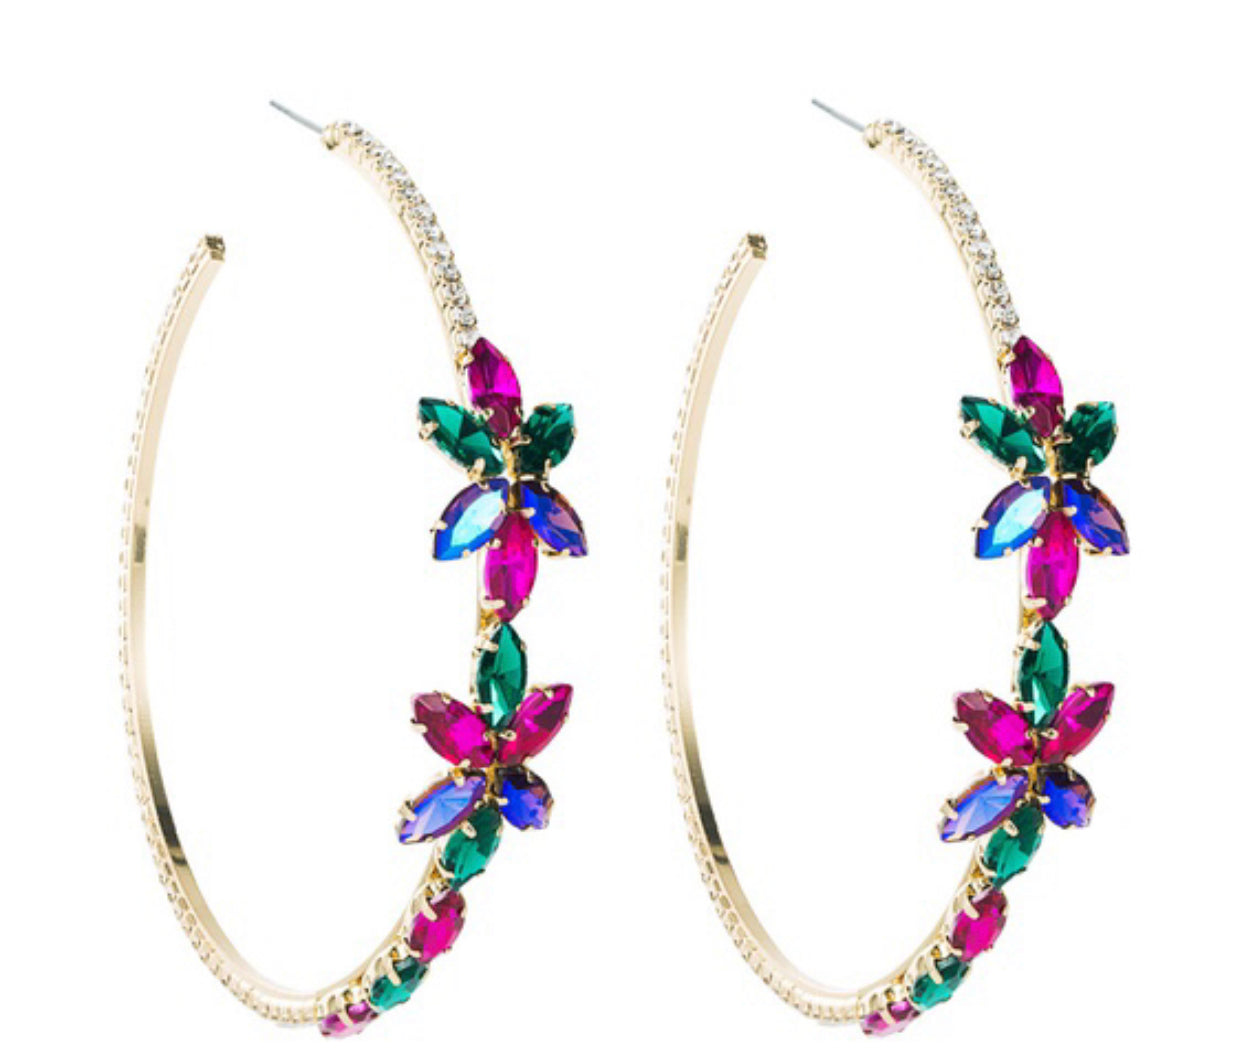 Lilly hoop earring - Multi Color